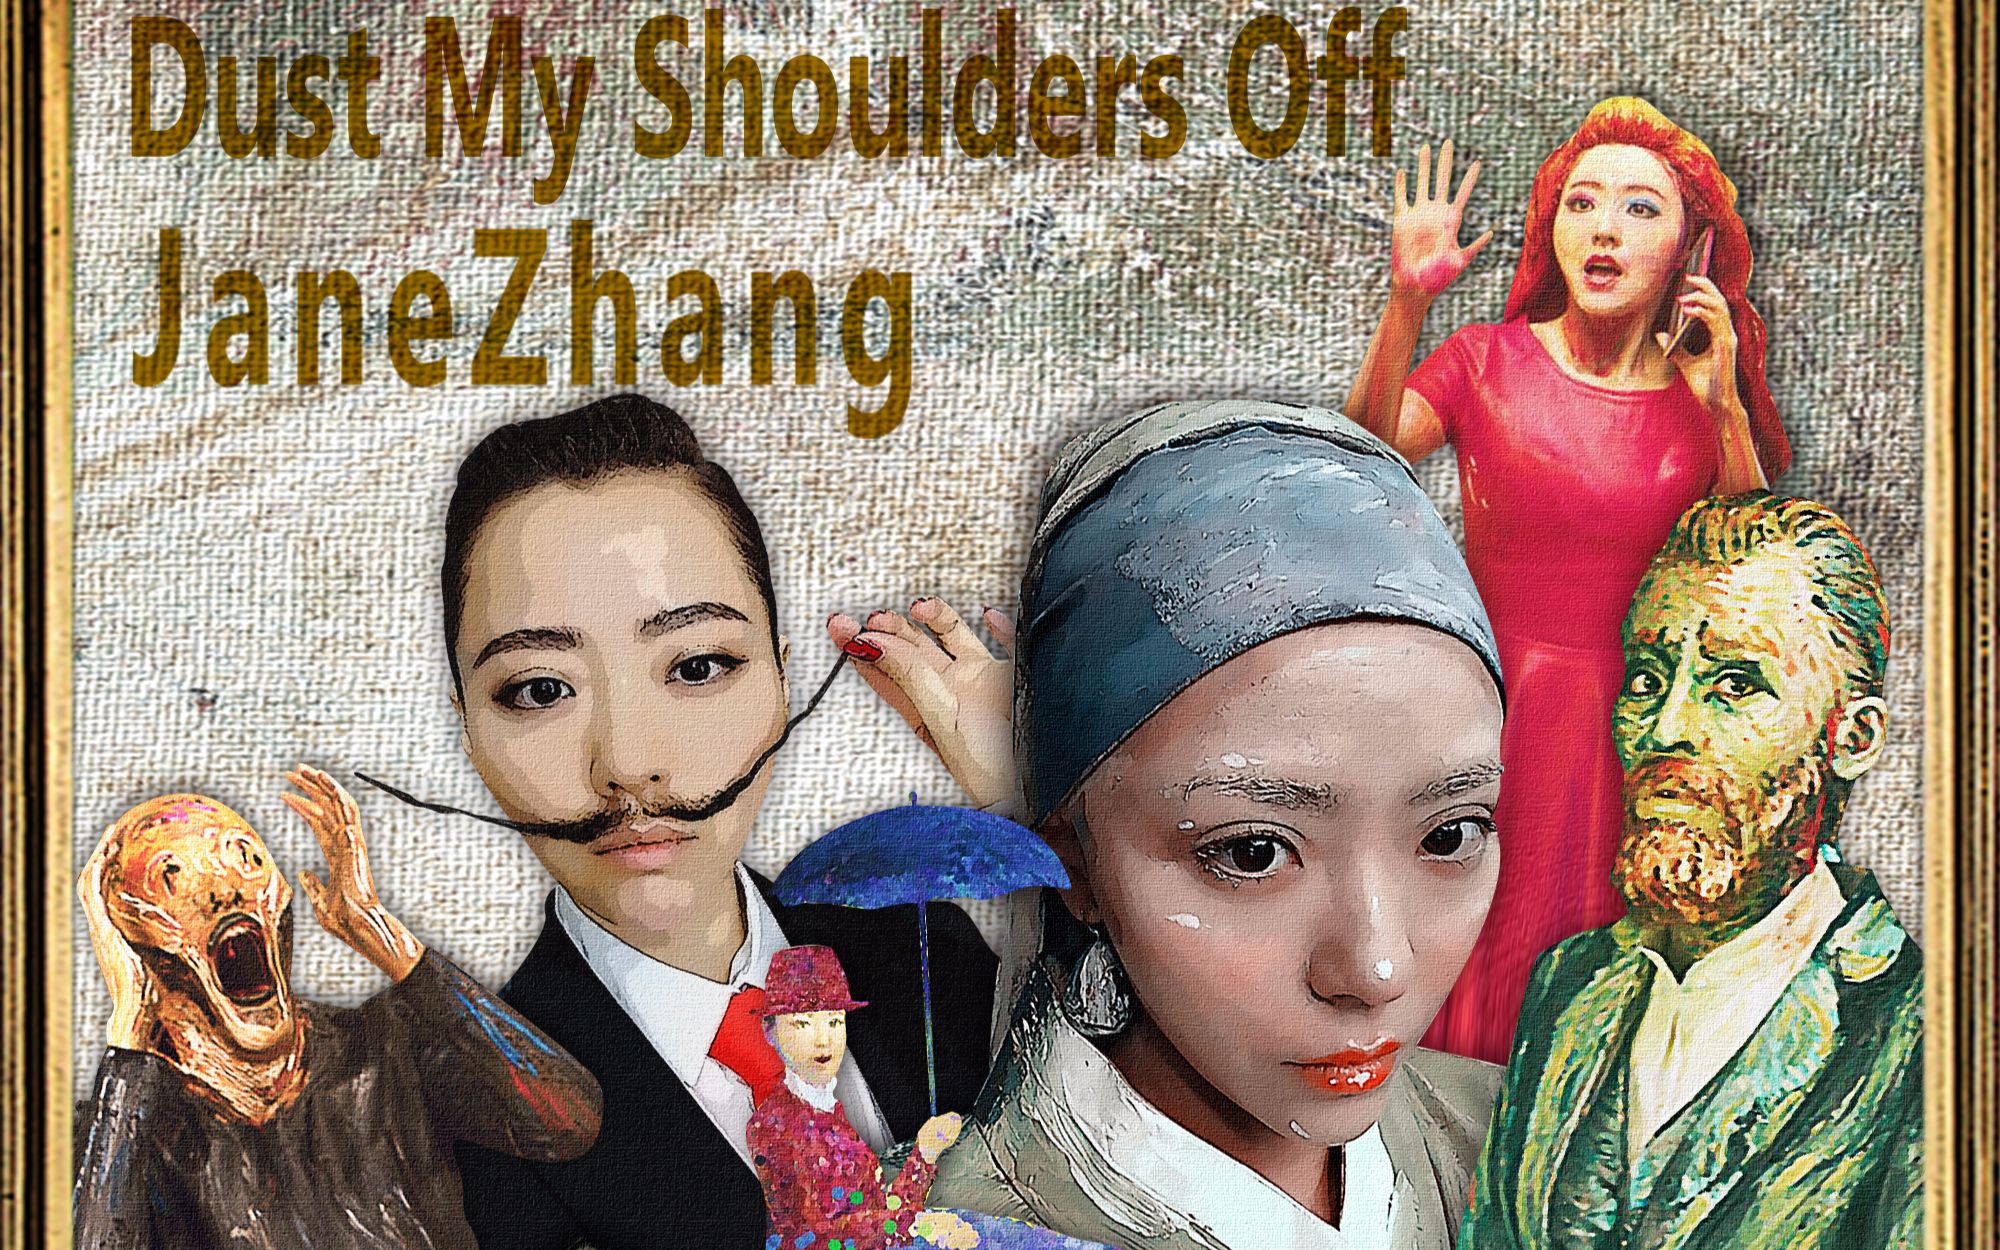 Dust my shoulders off by jane zhang